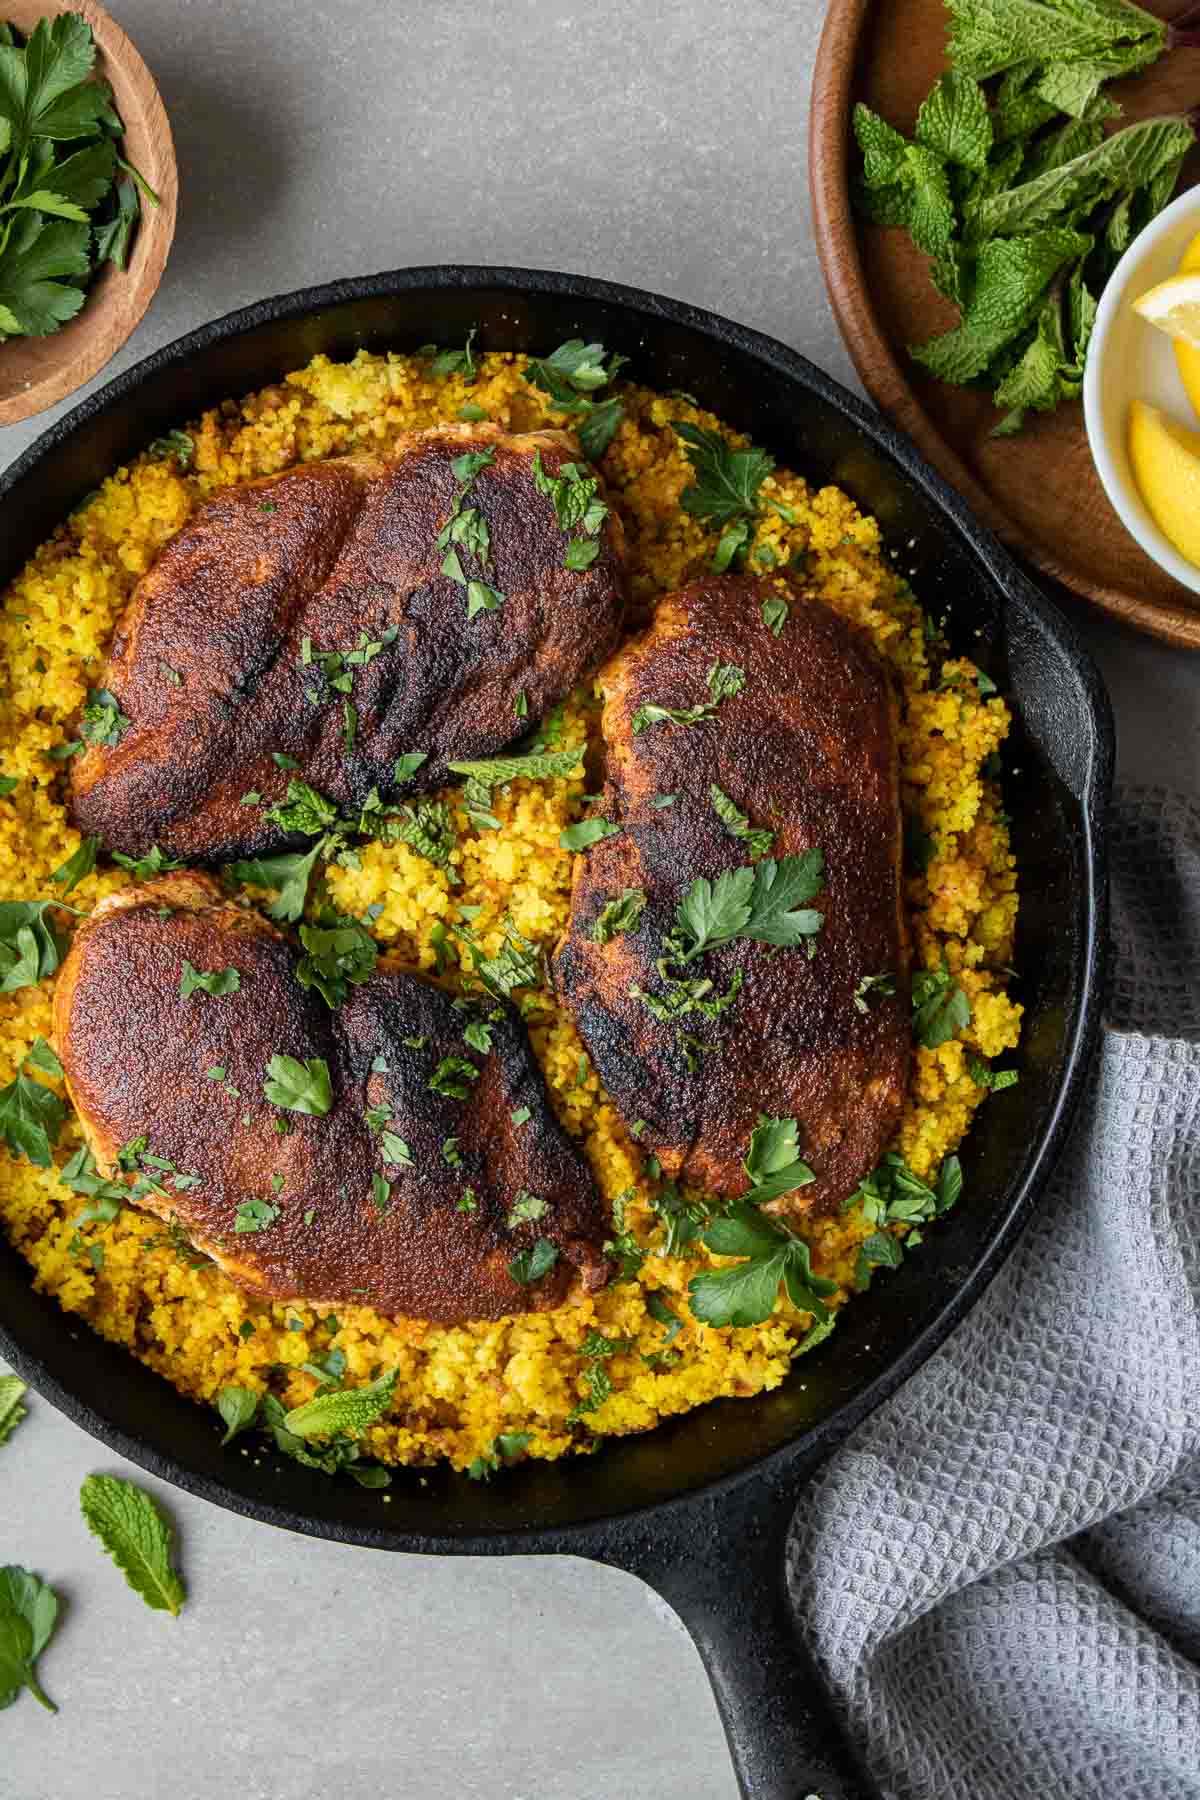 Cooked chicken and couscous in a cast-iron skillet with Moroccan spices and fresh herbs